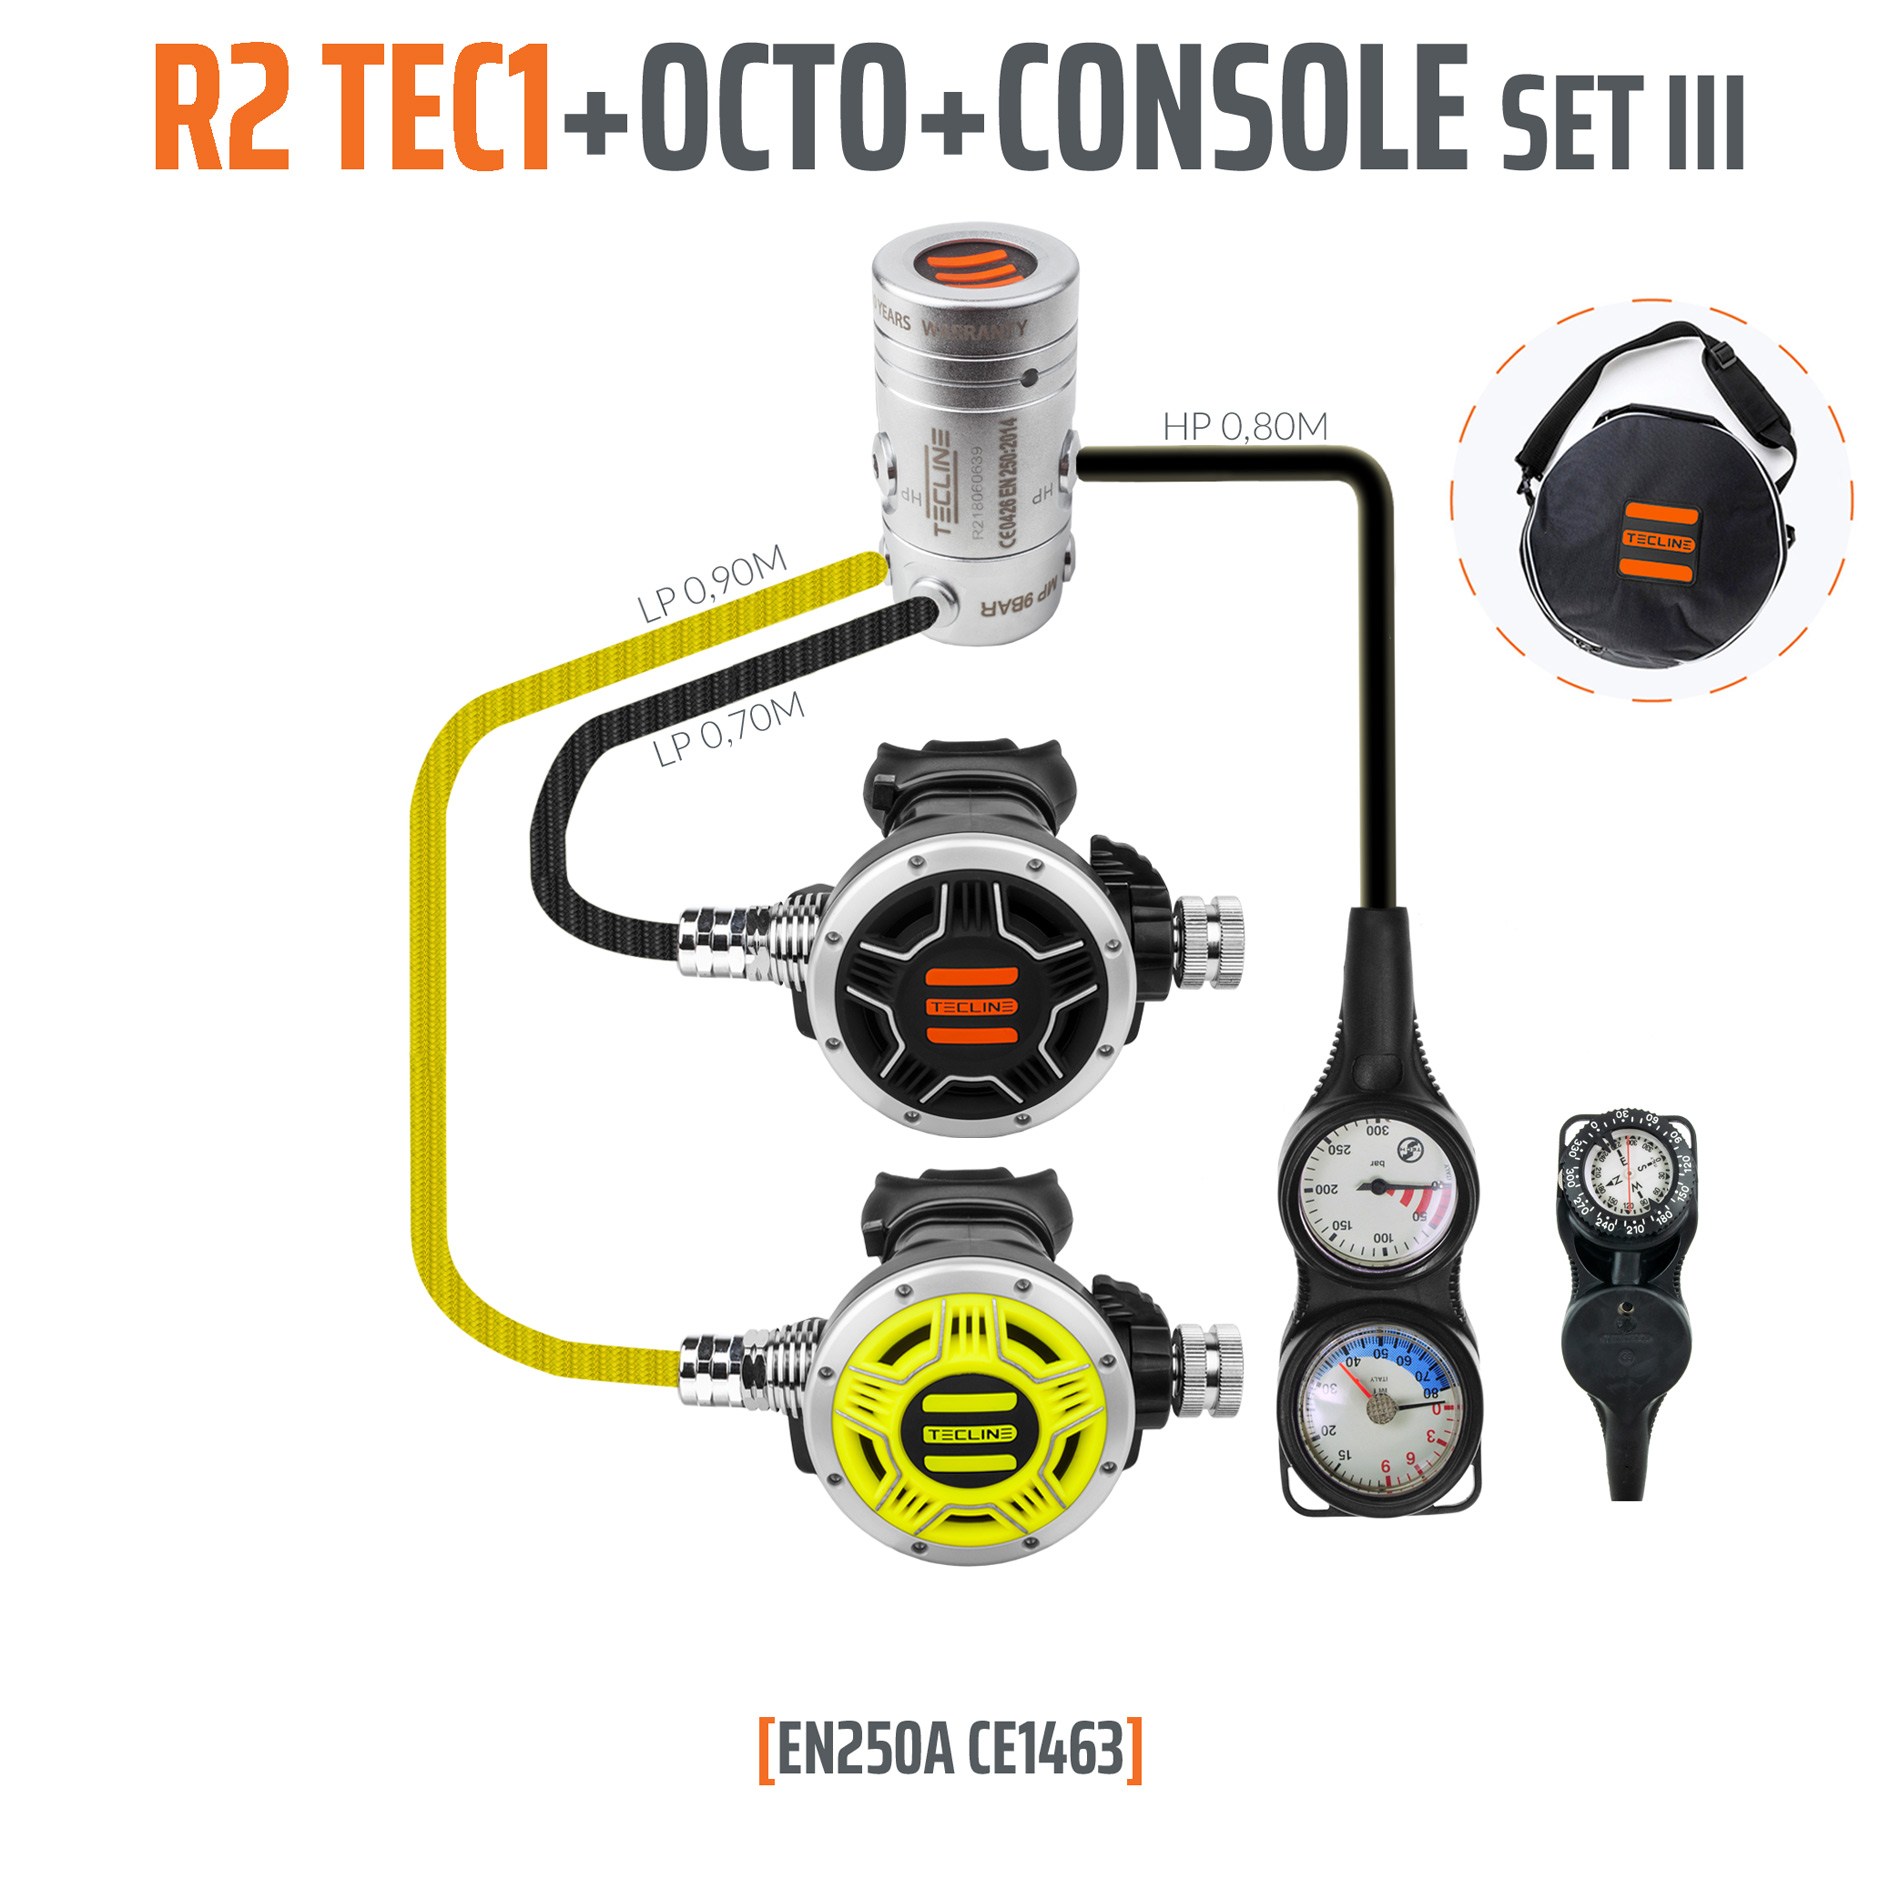 Tecline Regulator R2 TEC1 set III with octo and 3 elements console – EN250A